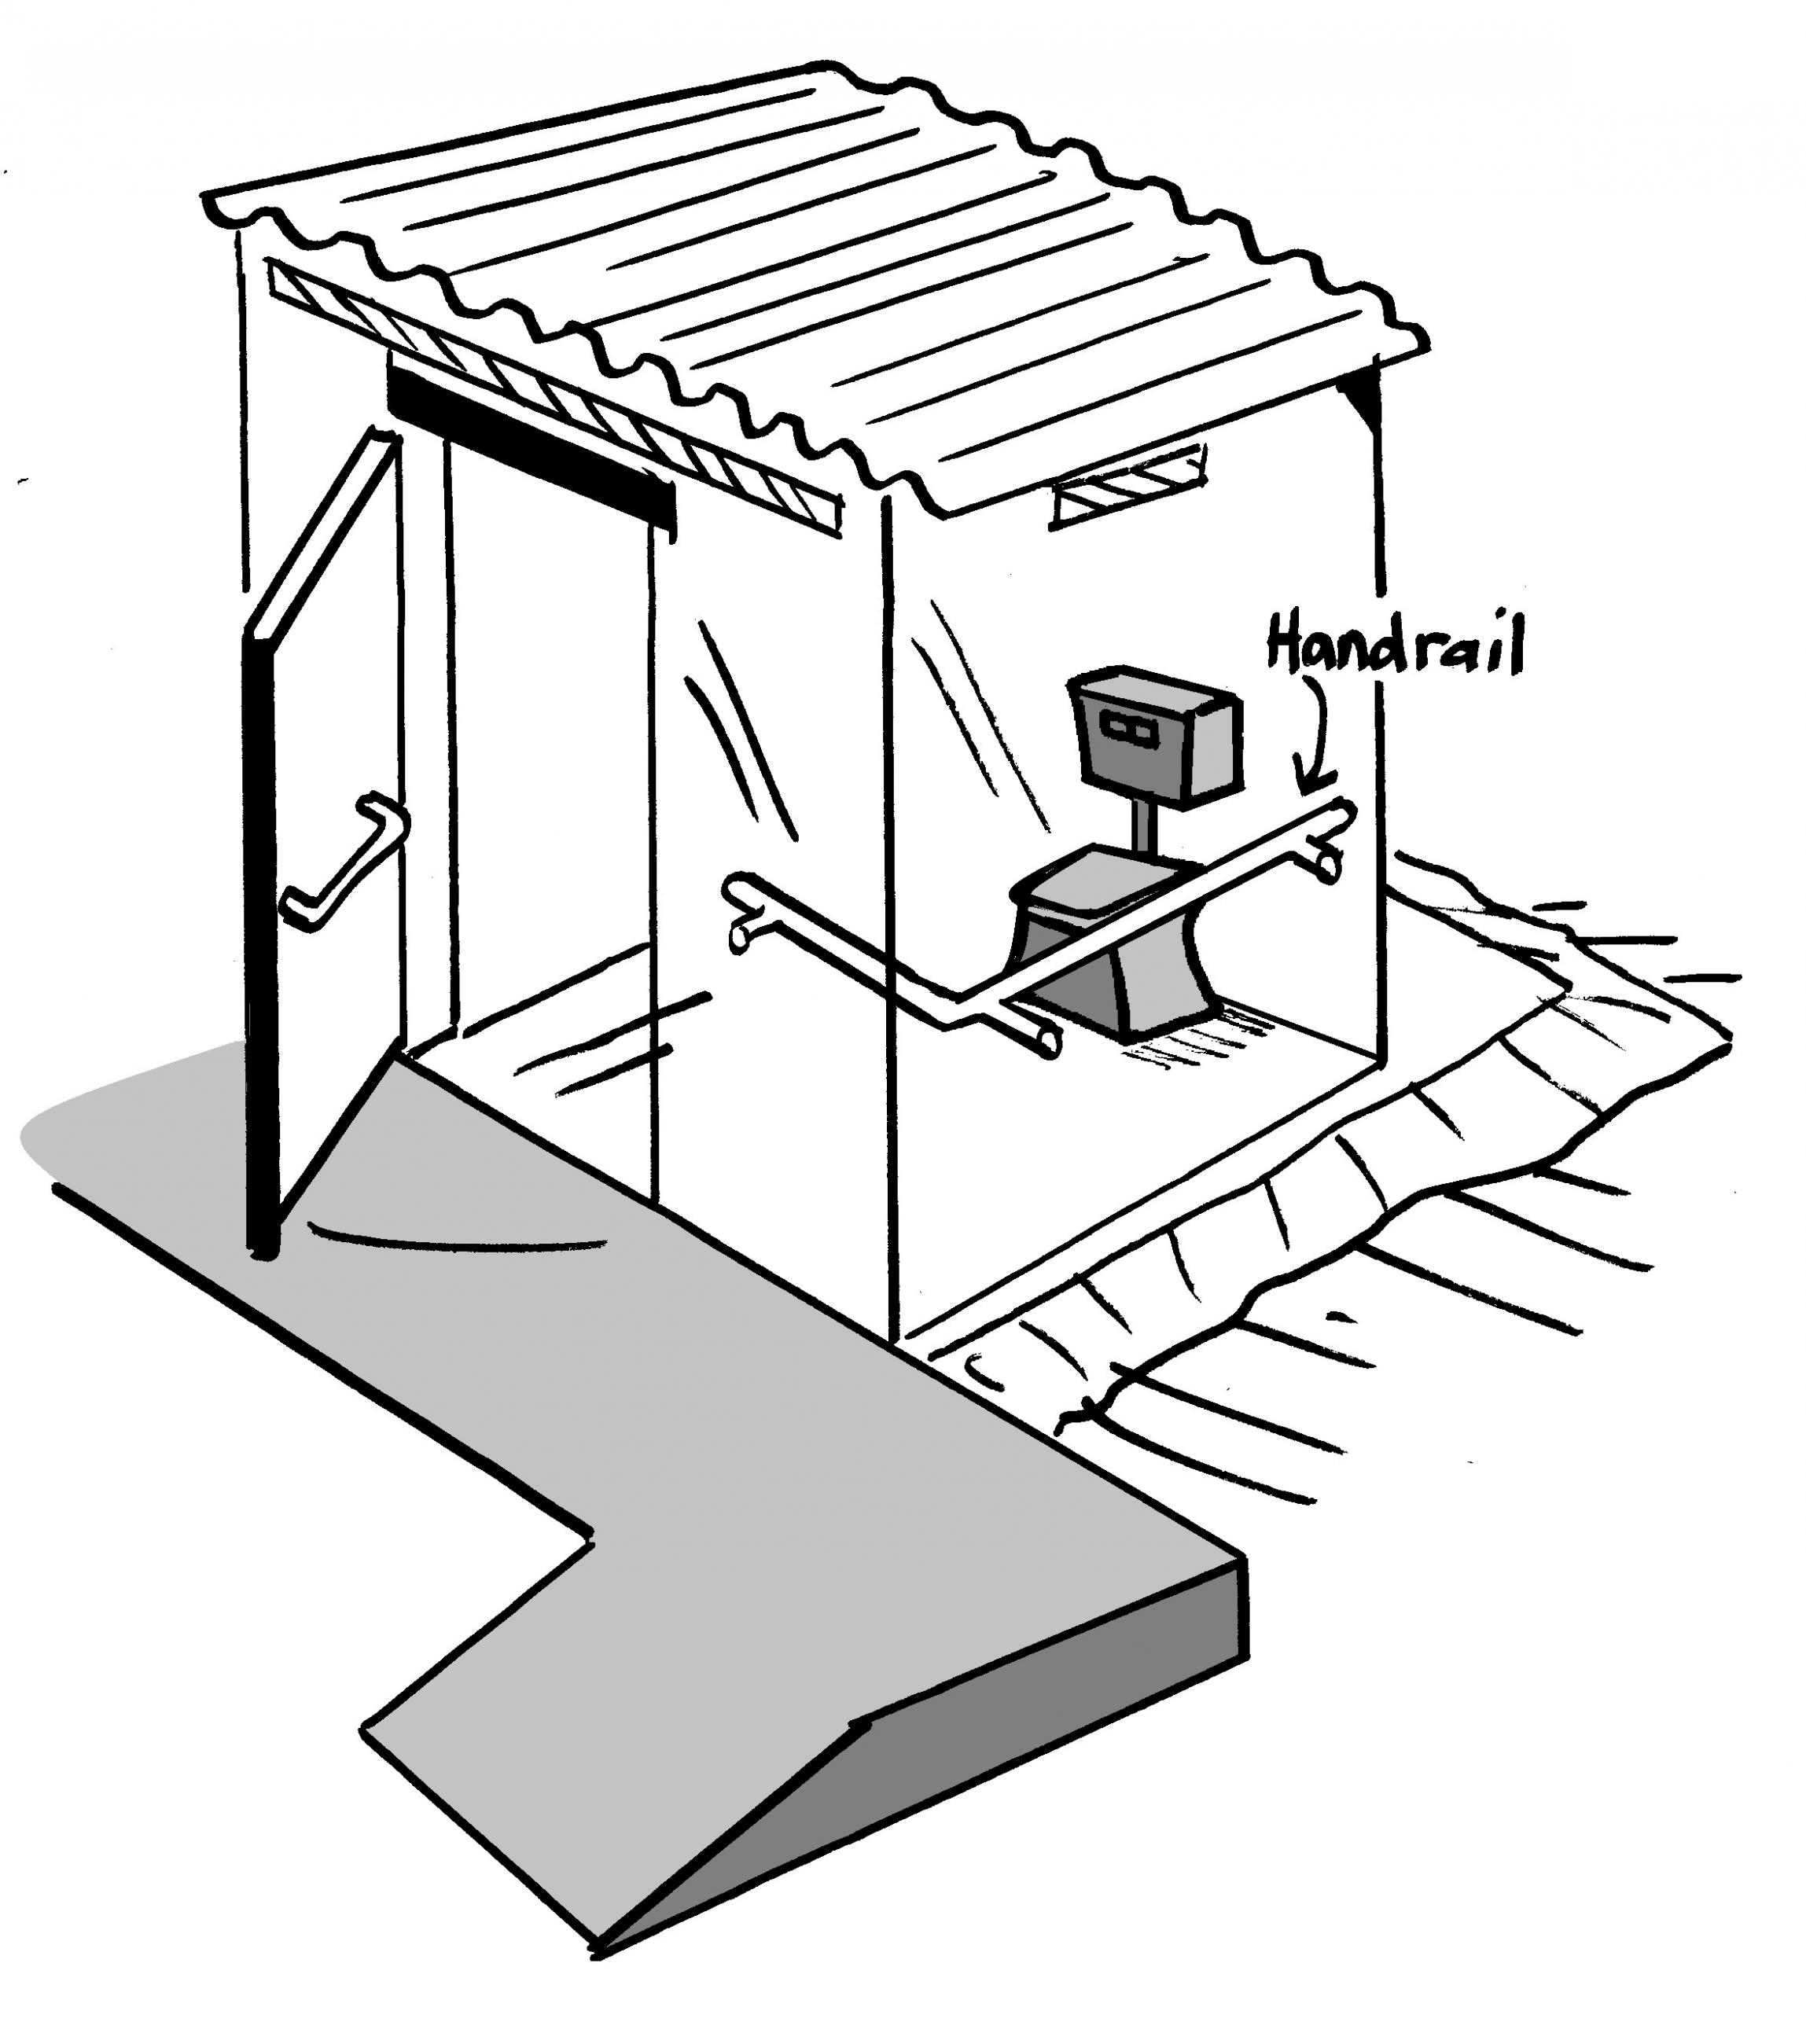 A latrine, which has a ramp and showing the positioning of a grabrail